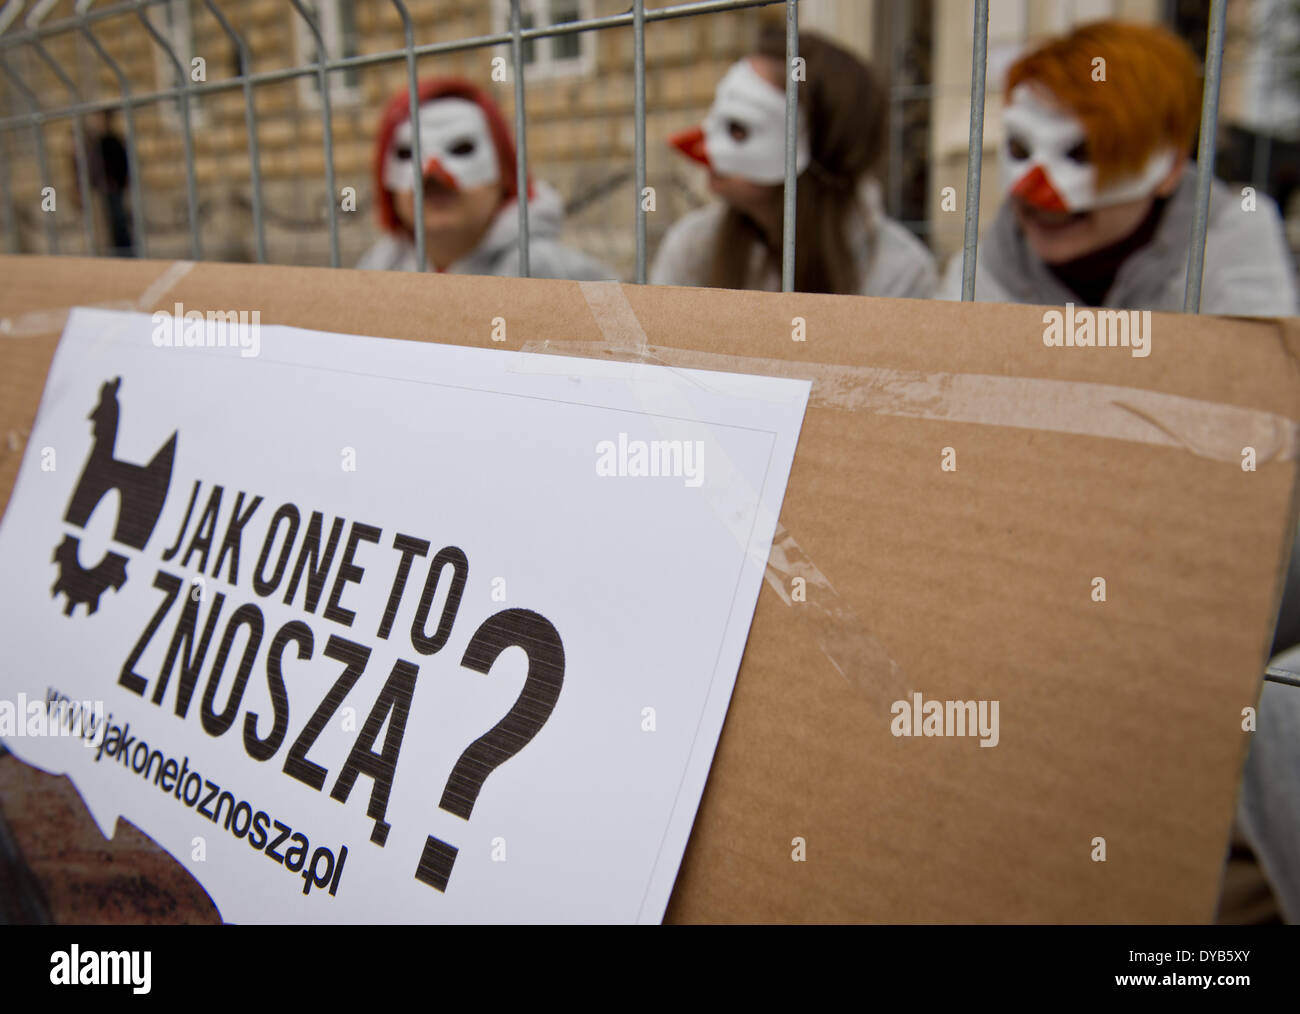 Warsaw, Poland. 12th Apr, 2014. activists from “Open cages” organization protests against poultry battery cages farming on 12th April in Warsaw. Four people were locked in cage for 24 hours. Stock Photo